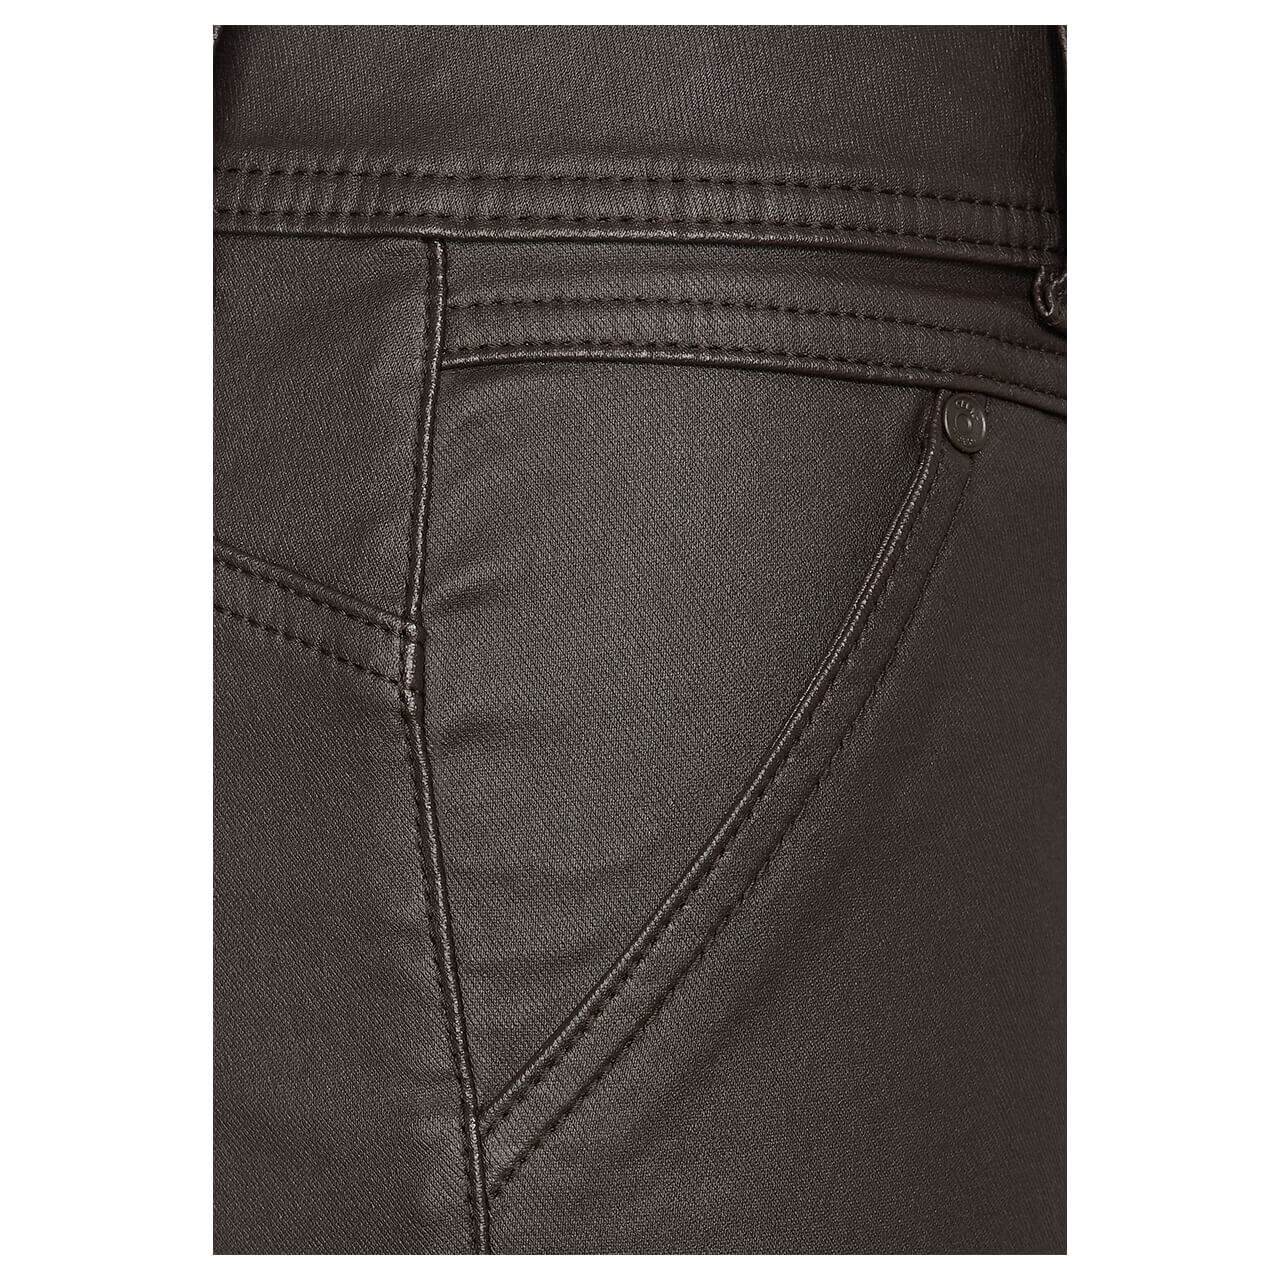 Cecil Toronto Jeans chocolate torte coated